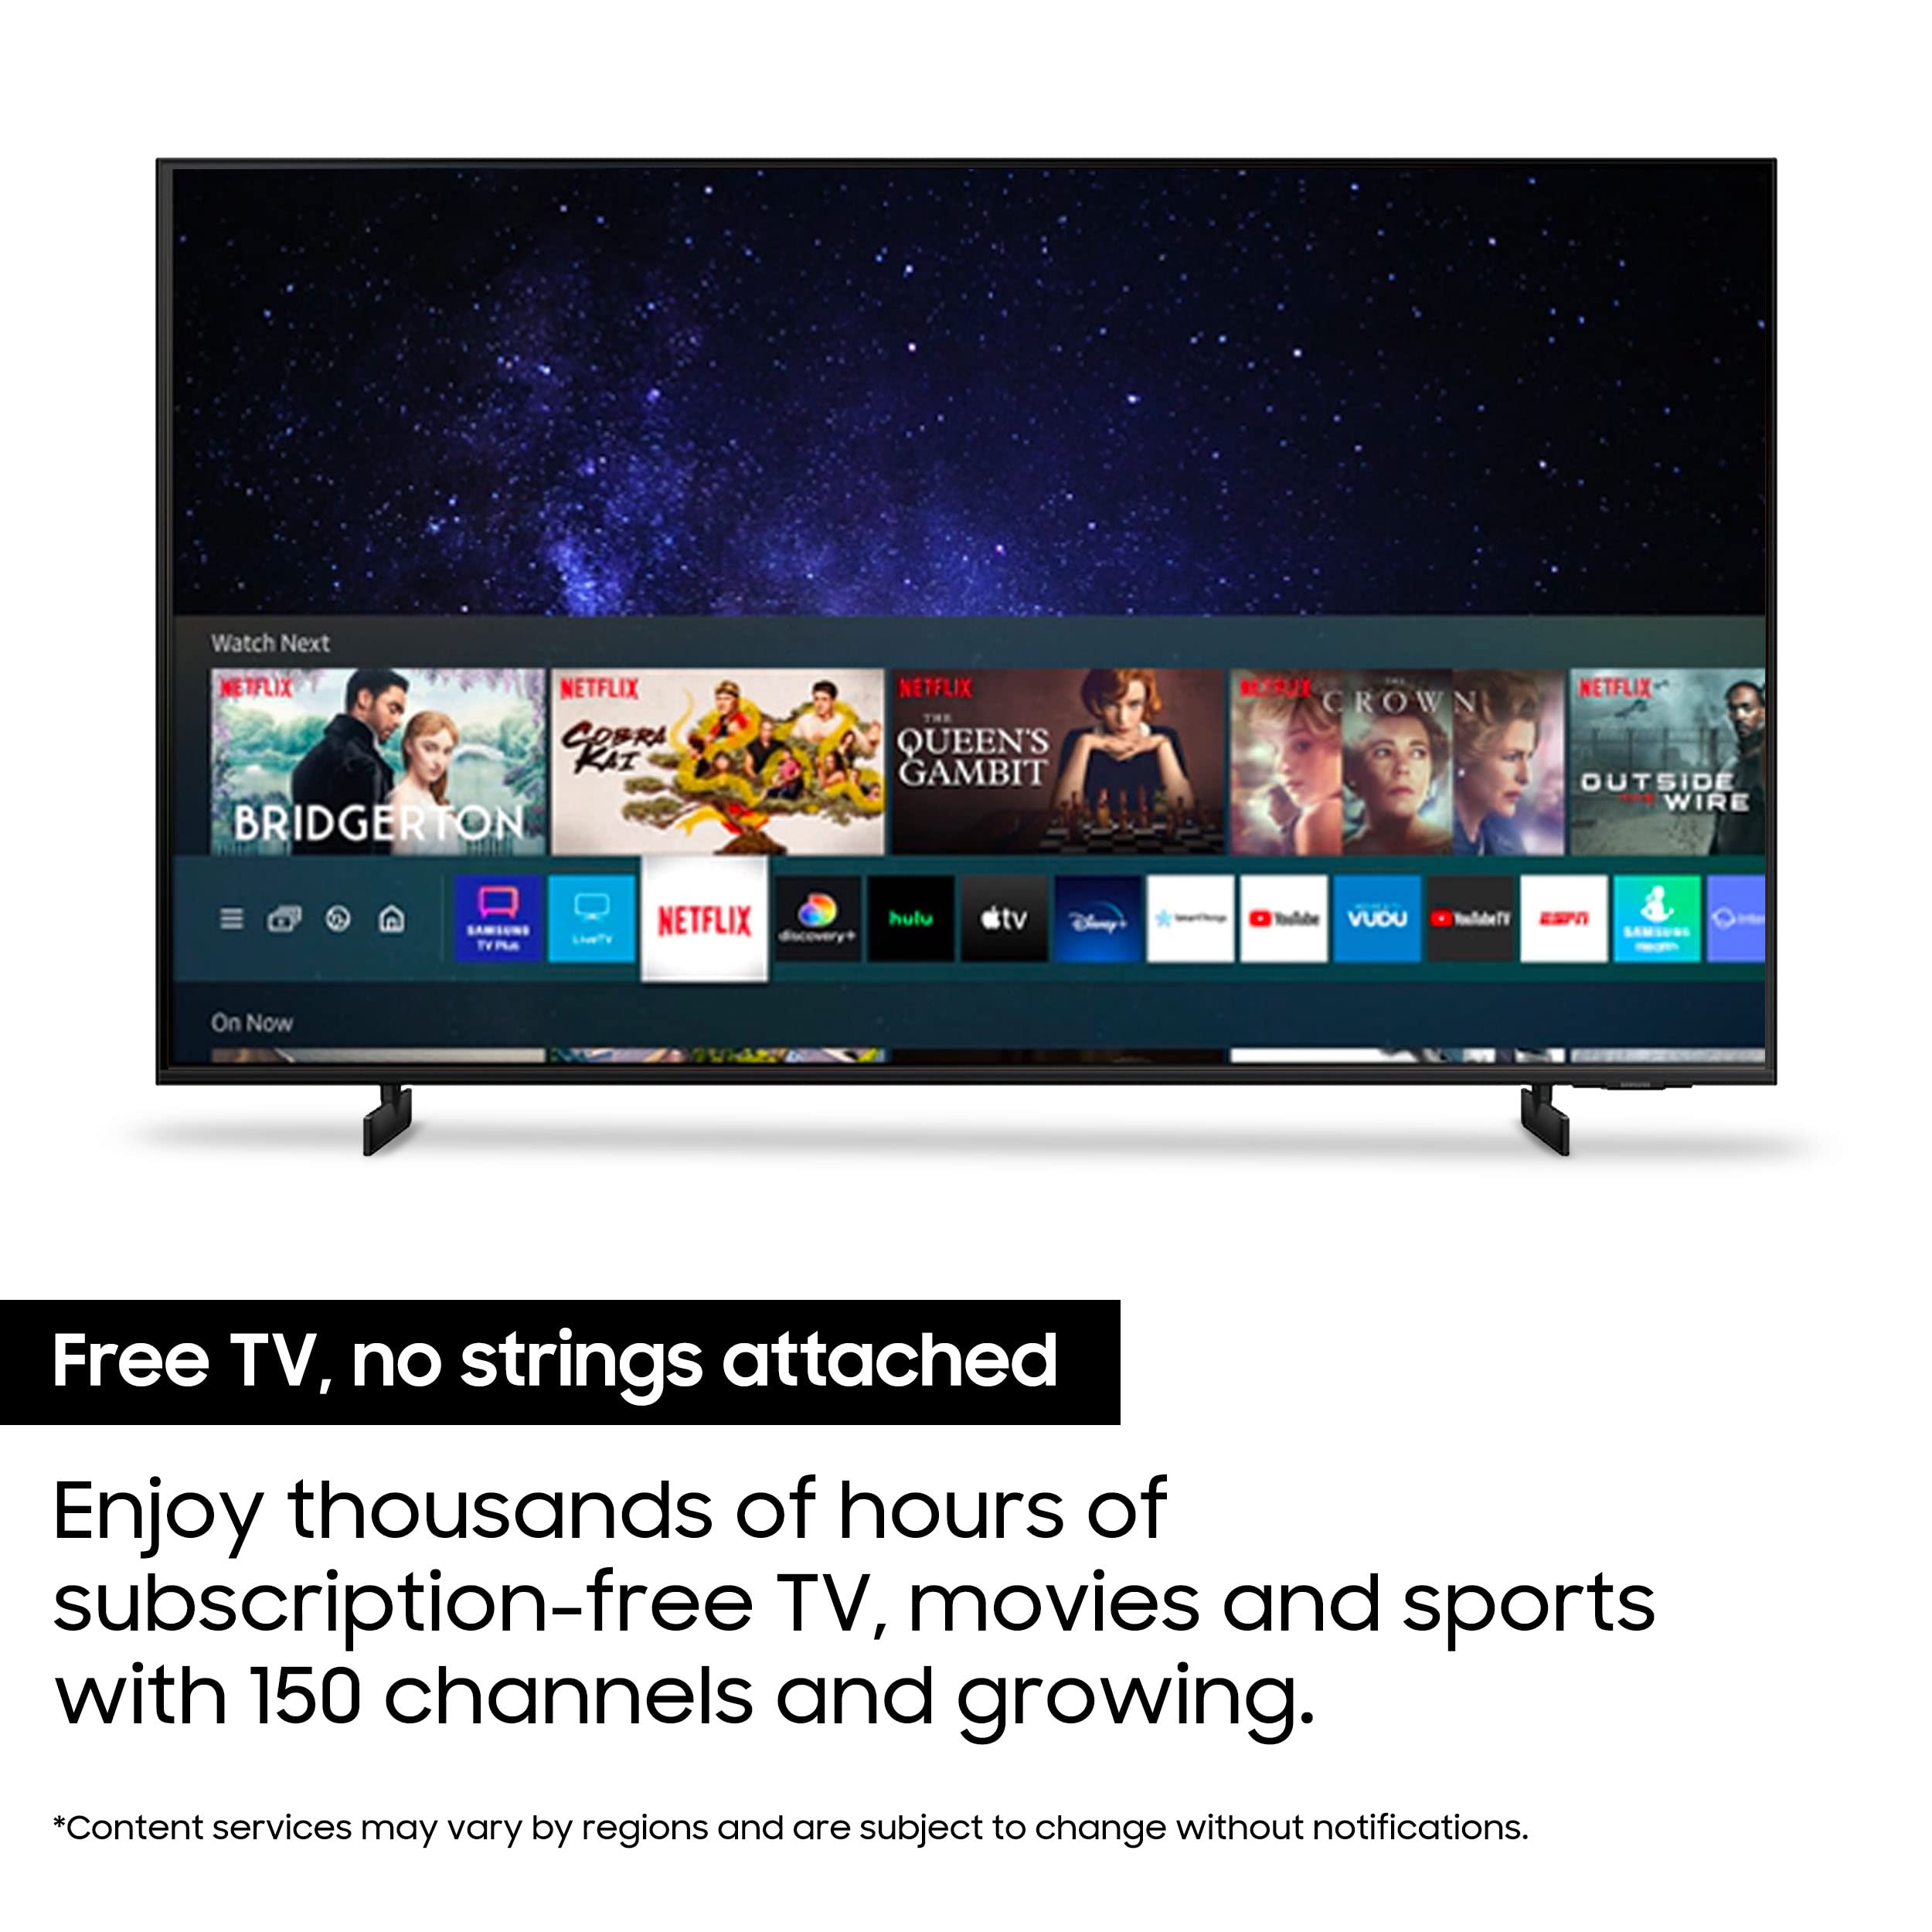 SAMSUNG 65-Inch Class Crystal 4K UHD AU8000 Series HDR, 3 HDMI Ports, Motion Xcelerator, Tap View, PC on TV, Q Symphony, Smart TV with Alexa Built-In (UN65AU8000FXZA, 2021 Model)